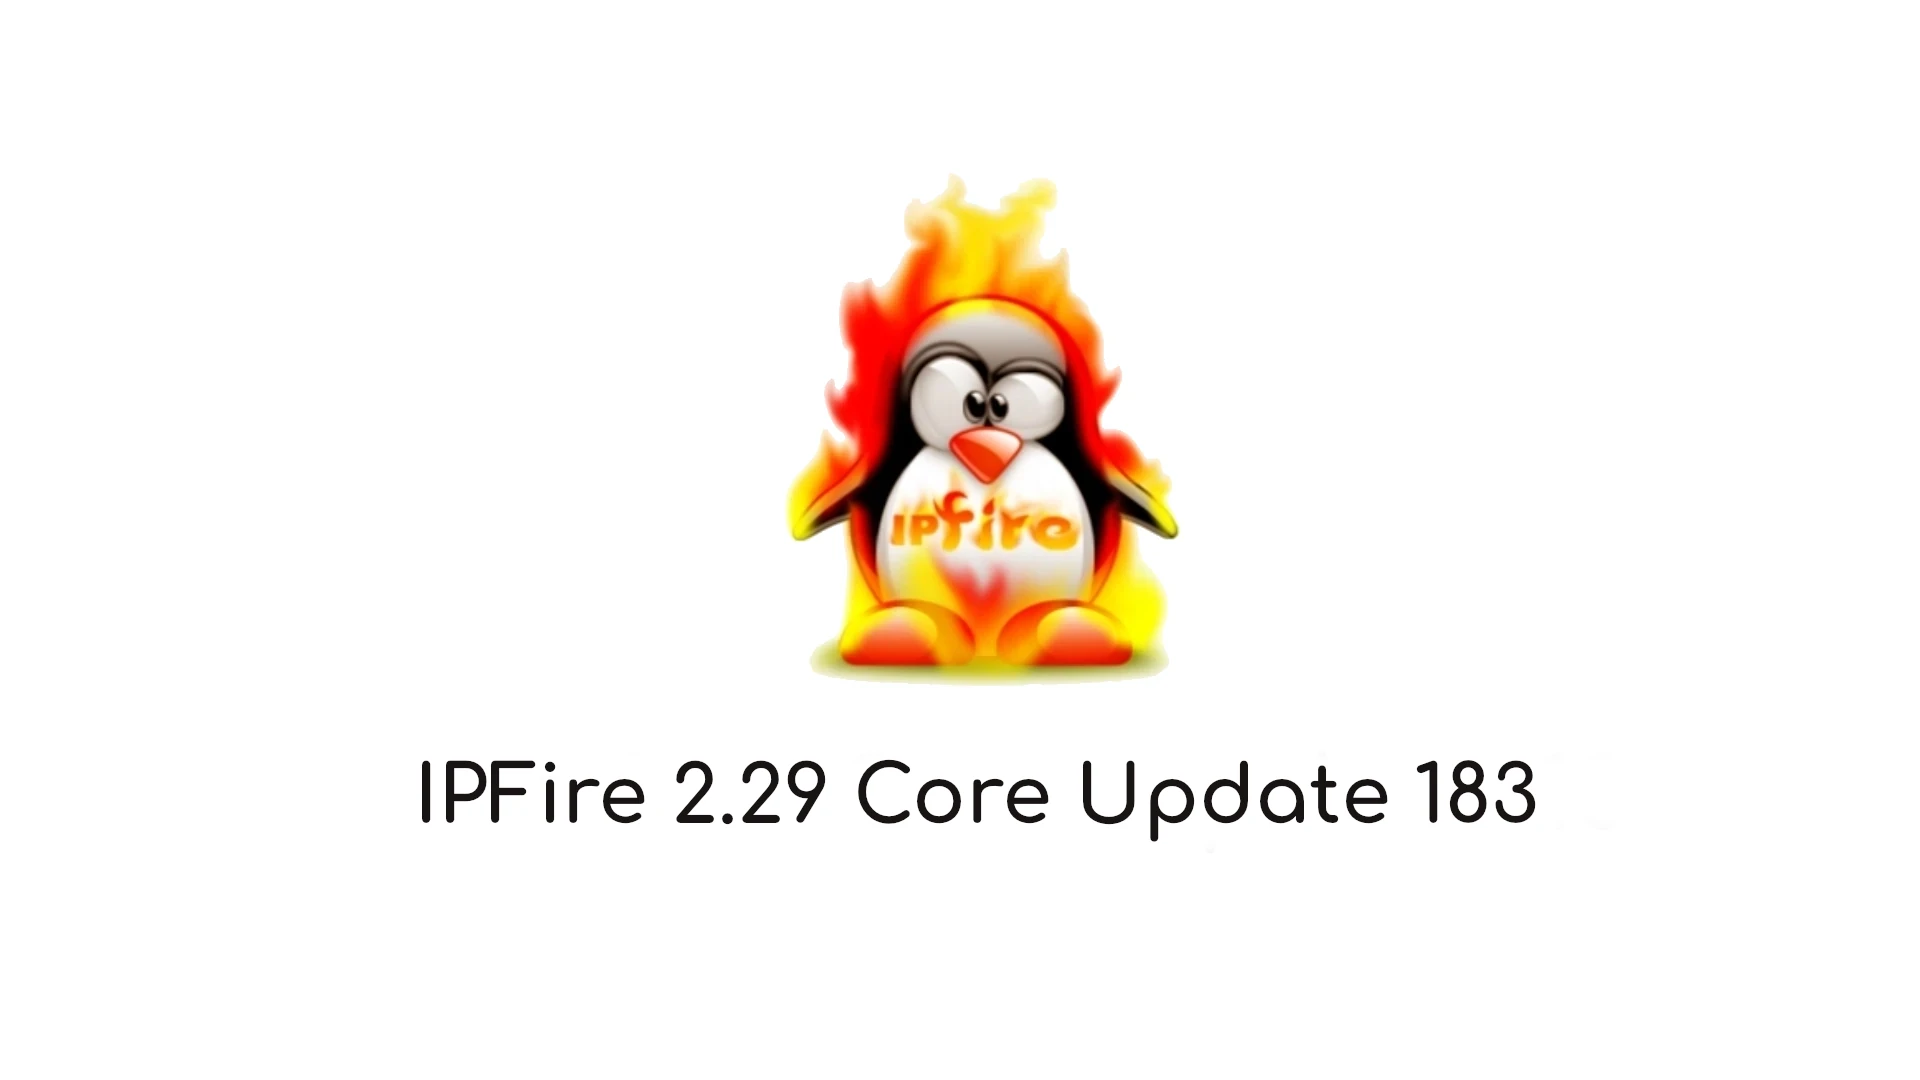 IPFire Hardened Linux Firewall Distro Is Now Powered by Linux Kernel 6.6 LTS